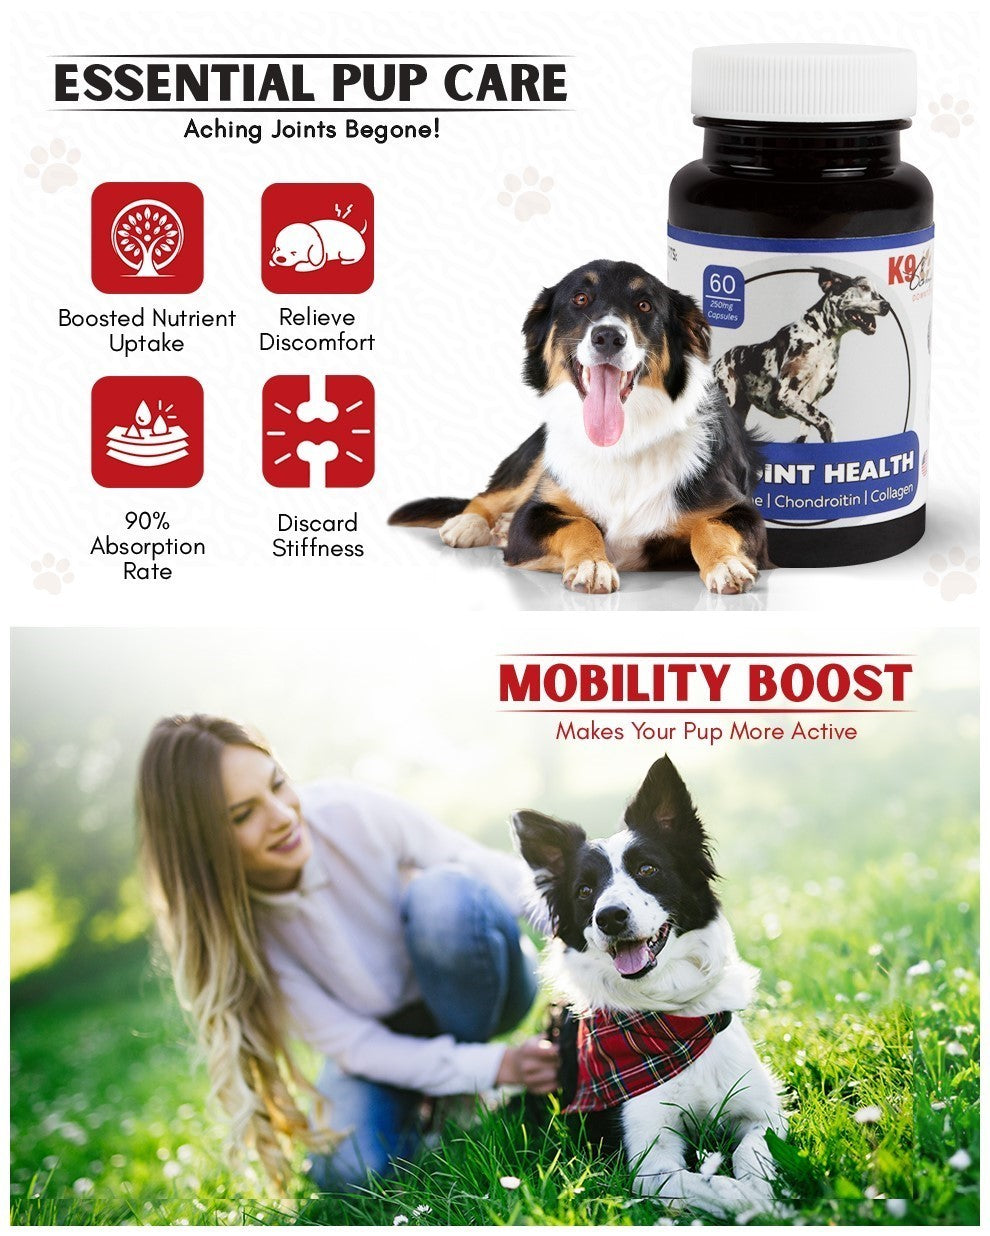 Hip & Joint Health Supplement - Vets Say it's Beneficial At Any Age